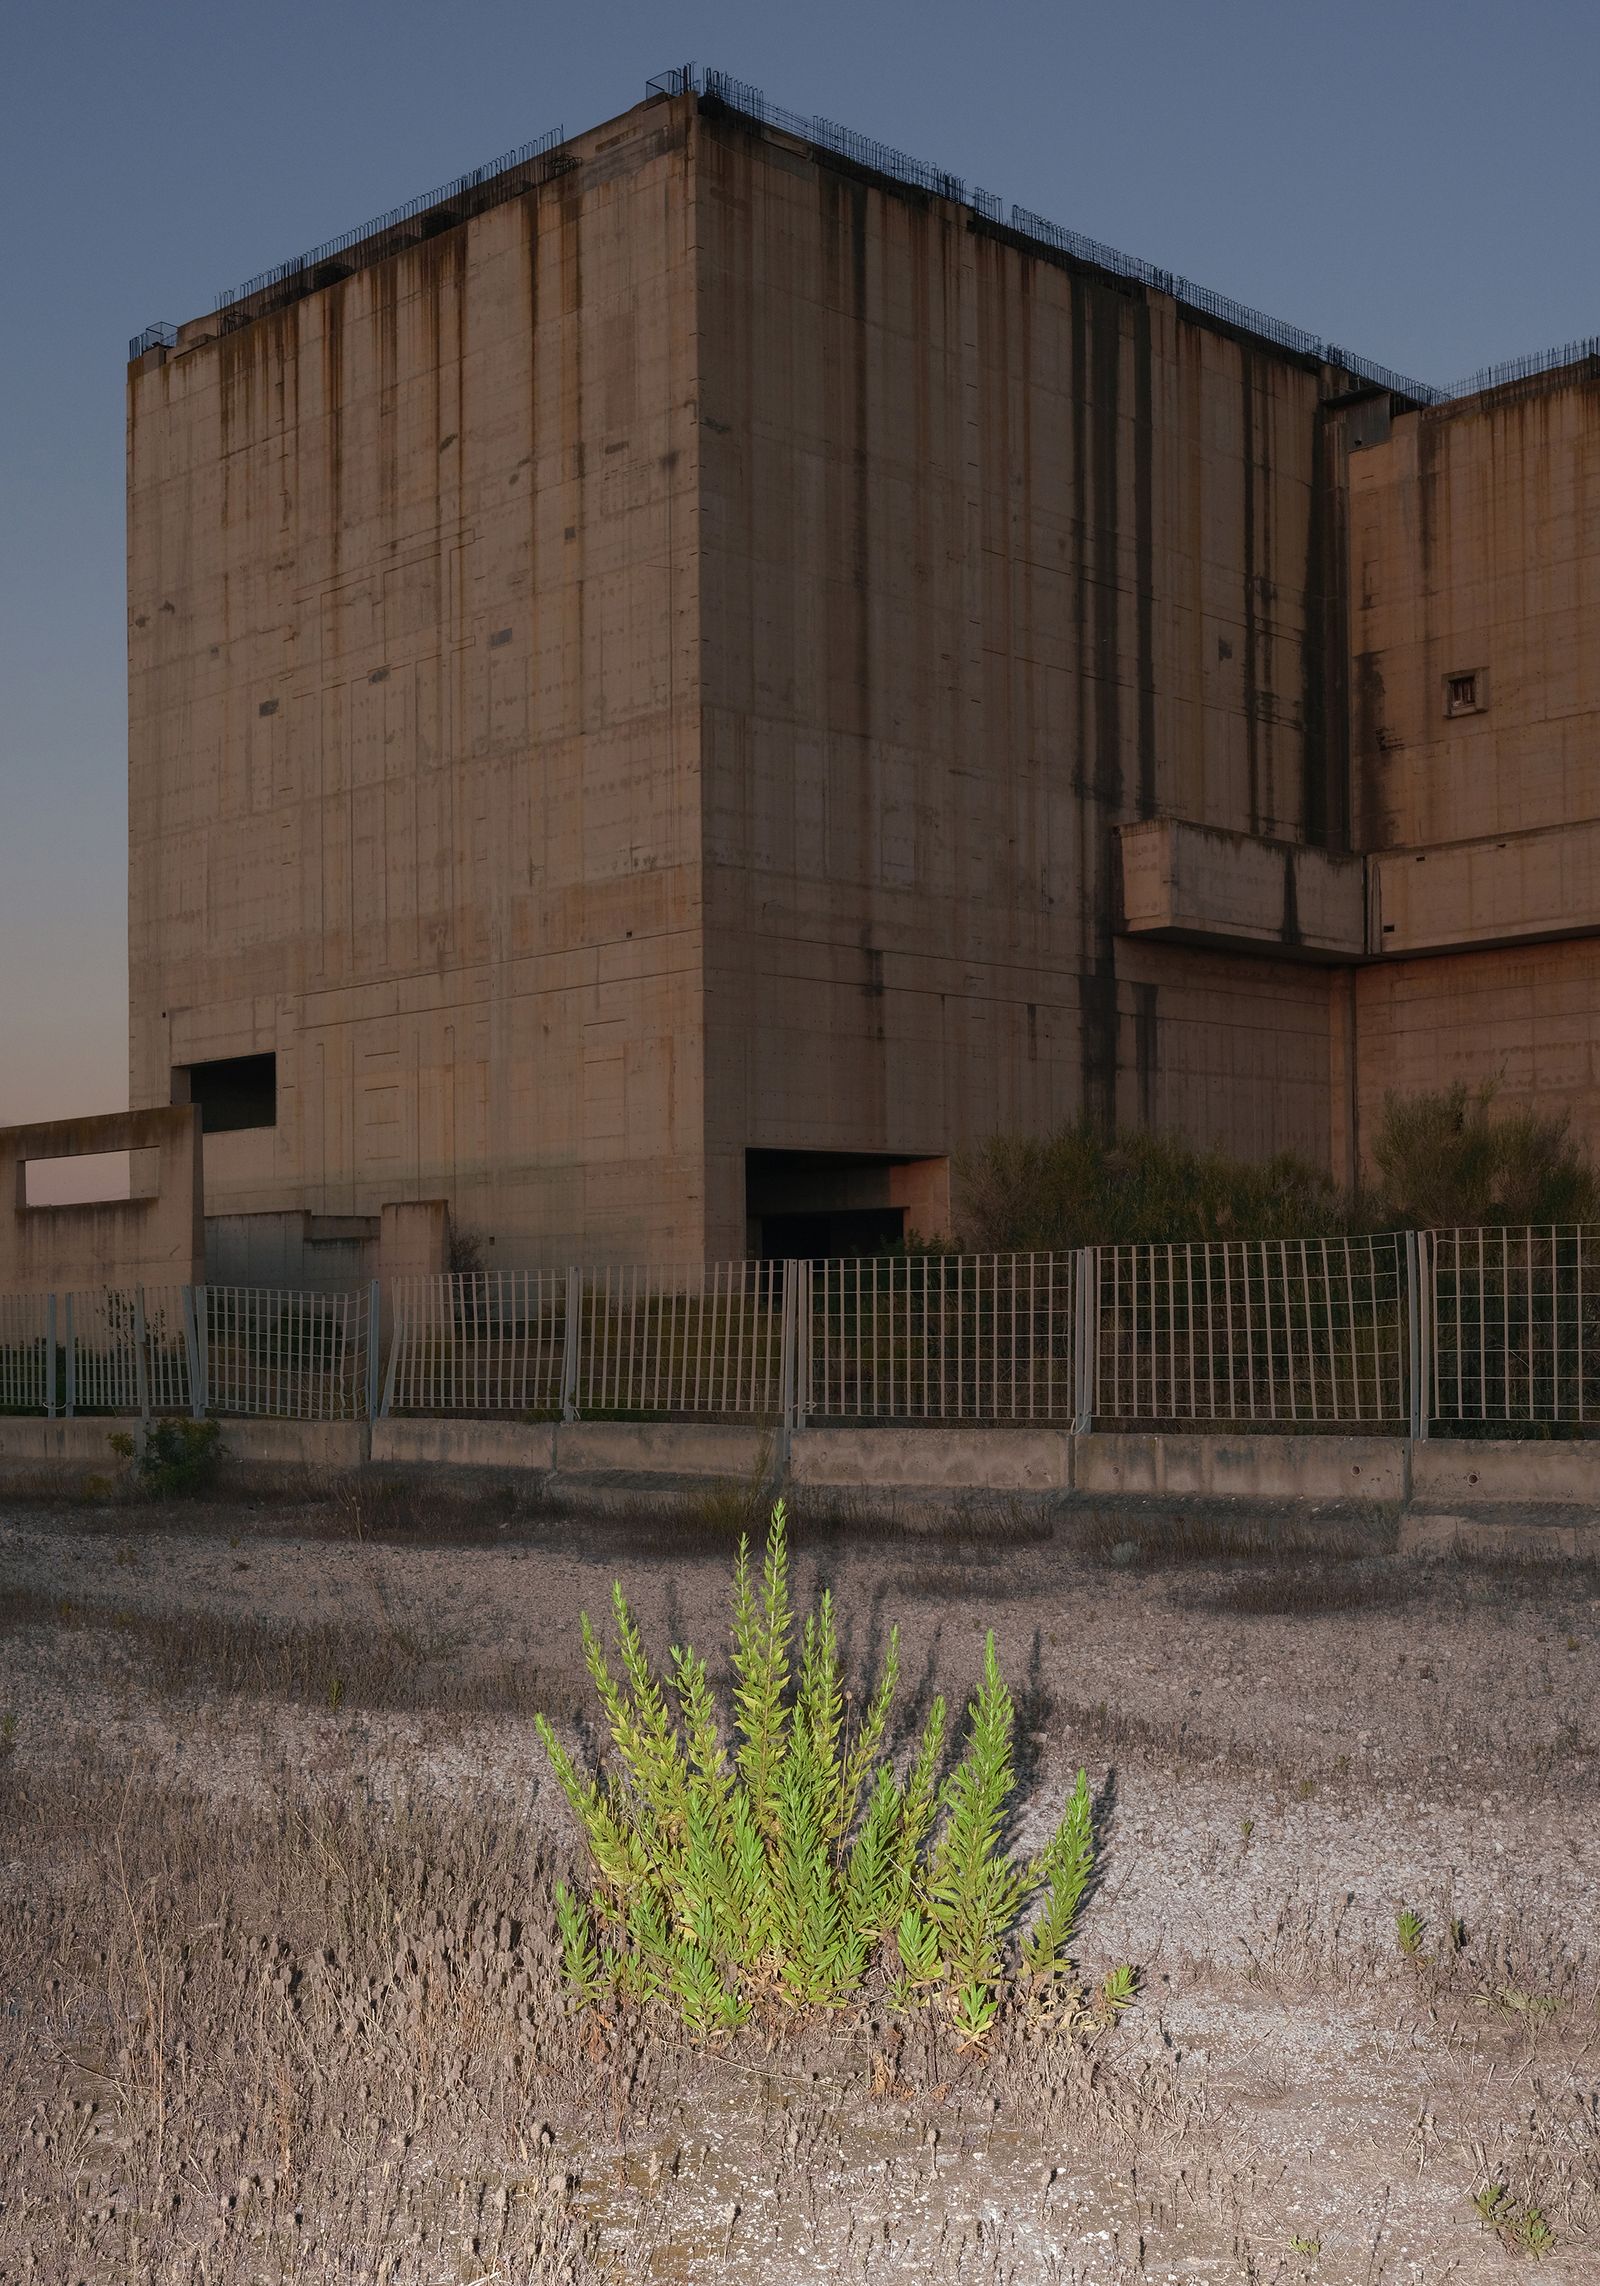 © Leonardo Magrelli - Image from the The Plant photography project